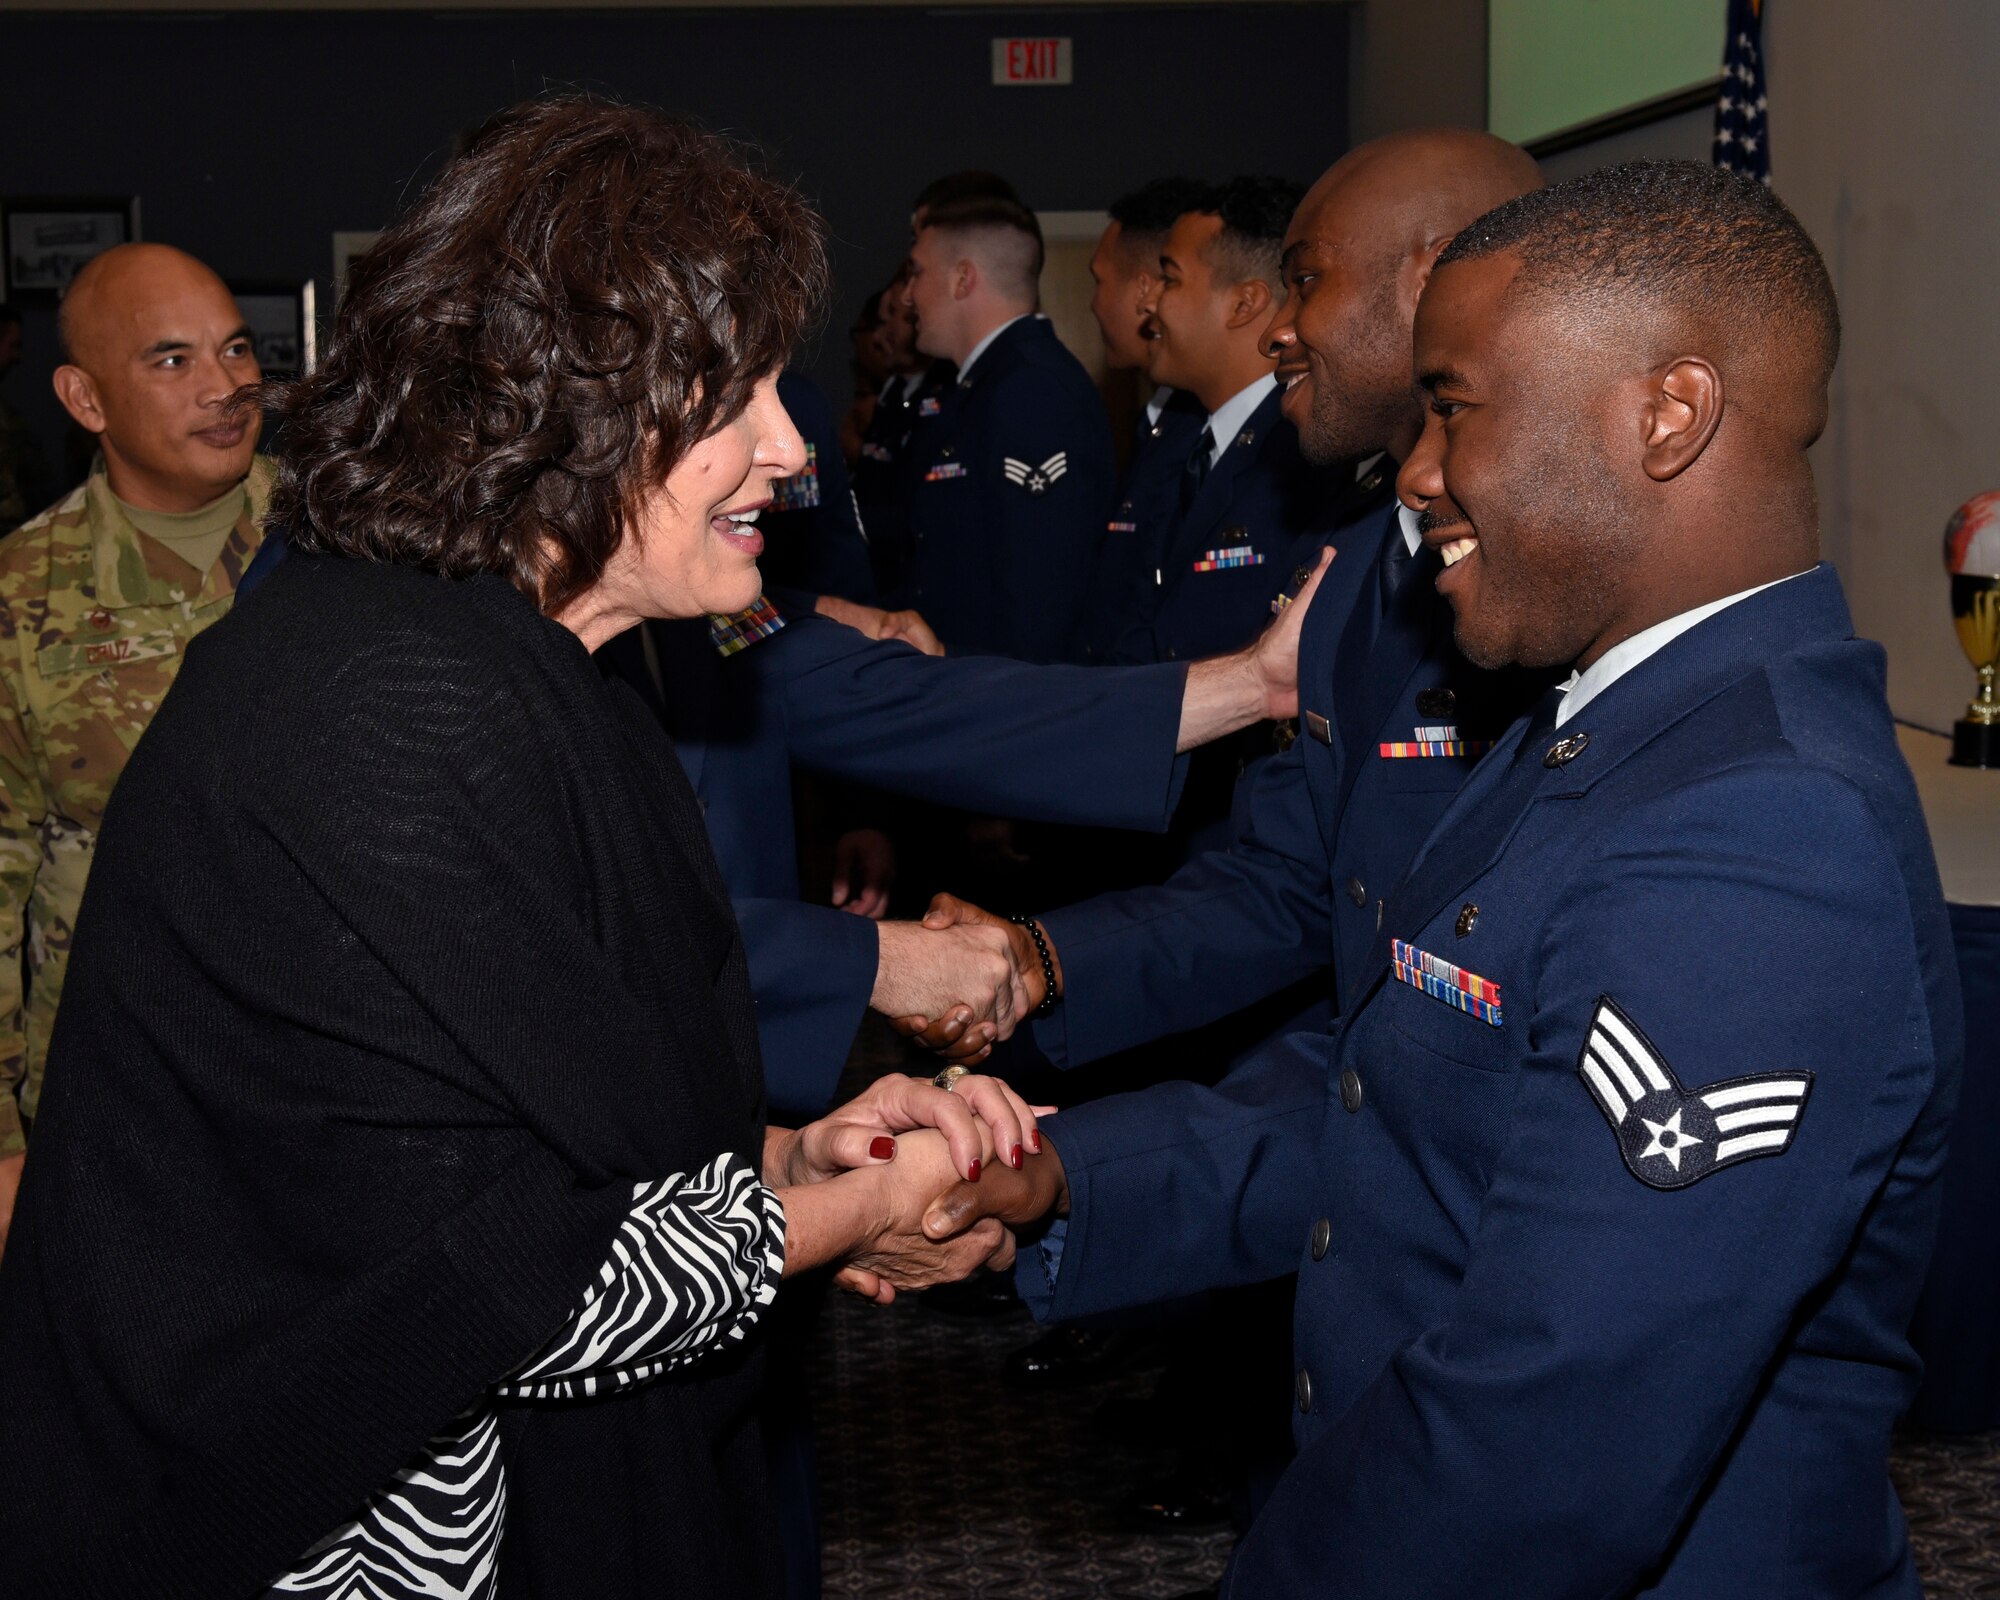 The sister of Medal of Honor recipient Capt. Lance P. Sijan, Janine Sijan, congratulates Airman Leadership School Class 19-G at the event center on Goodfellow Air Force Base, Texas, Oct. 24, 2019. The four-week course was designed to shape today’s Airmen into tomorrow’s leaders. (U.S. Air Force photo by Airman 1st Class Ethan Sherwood/Released)